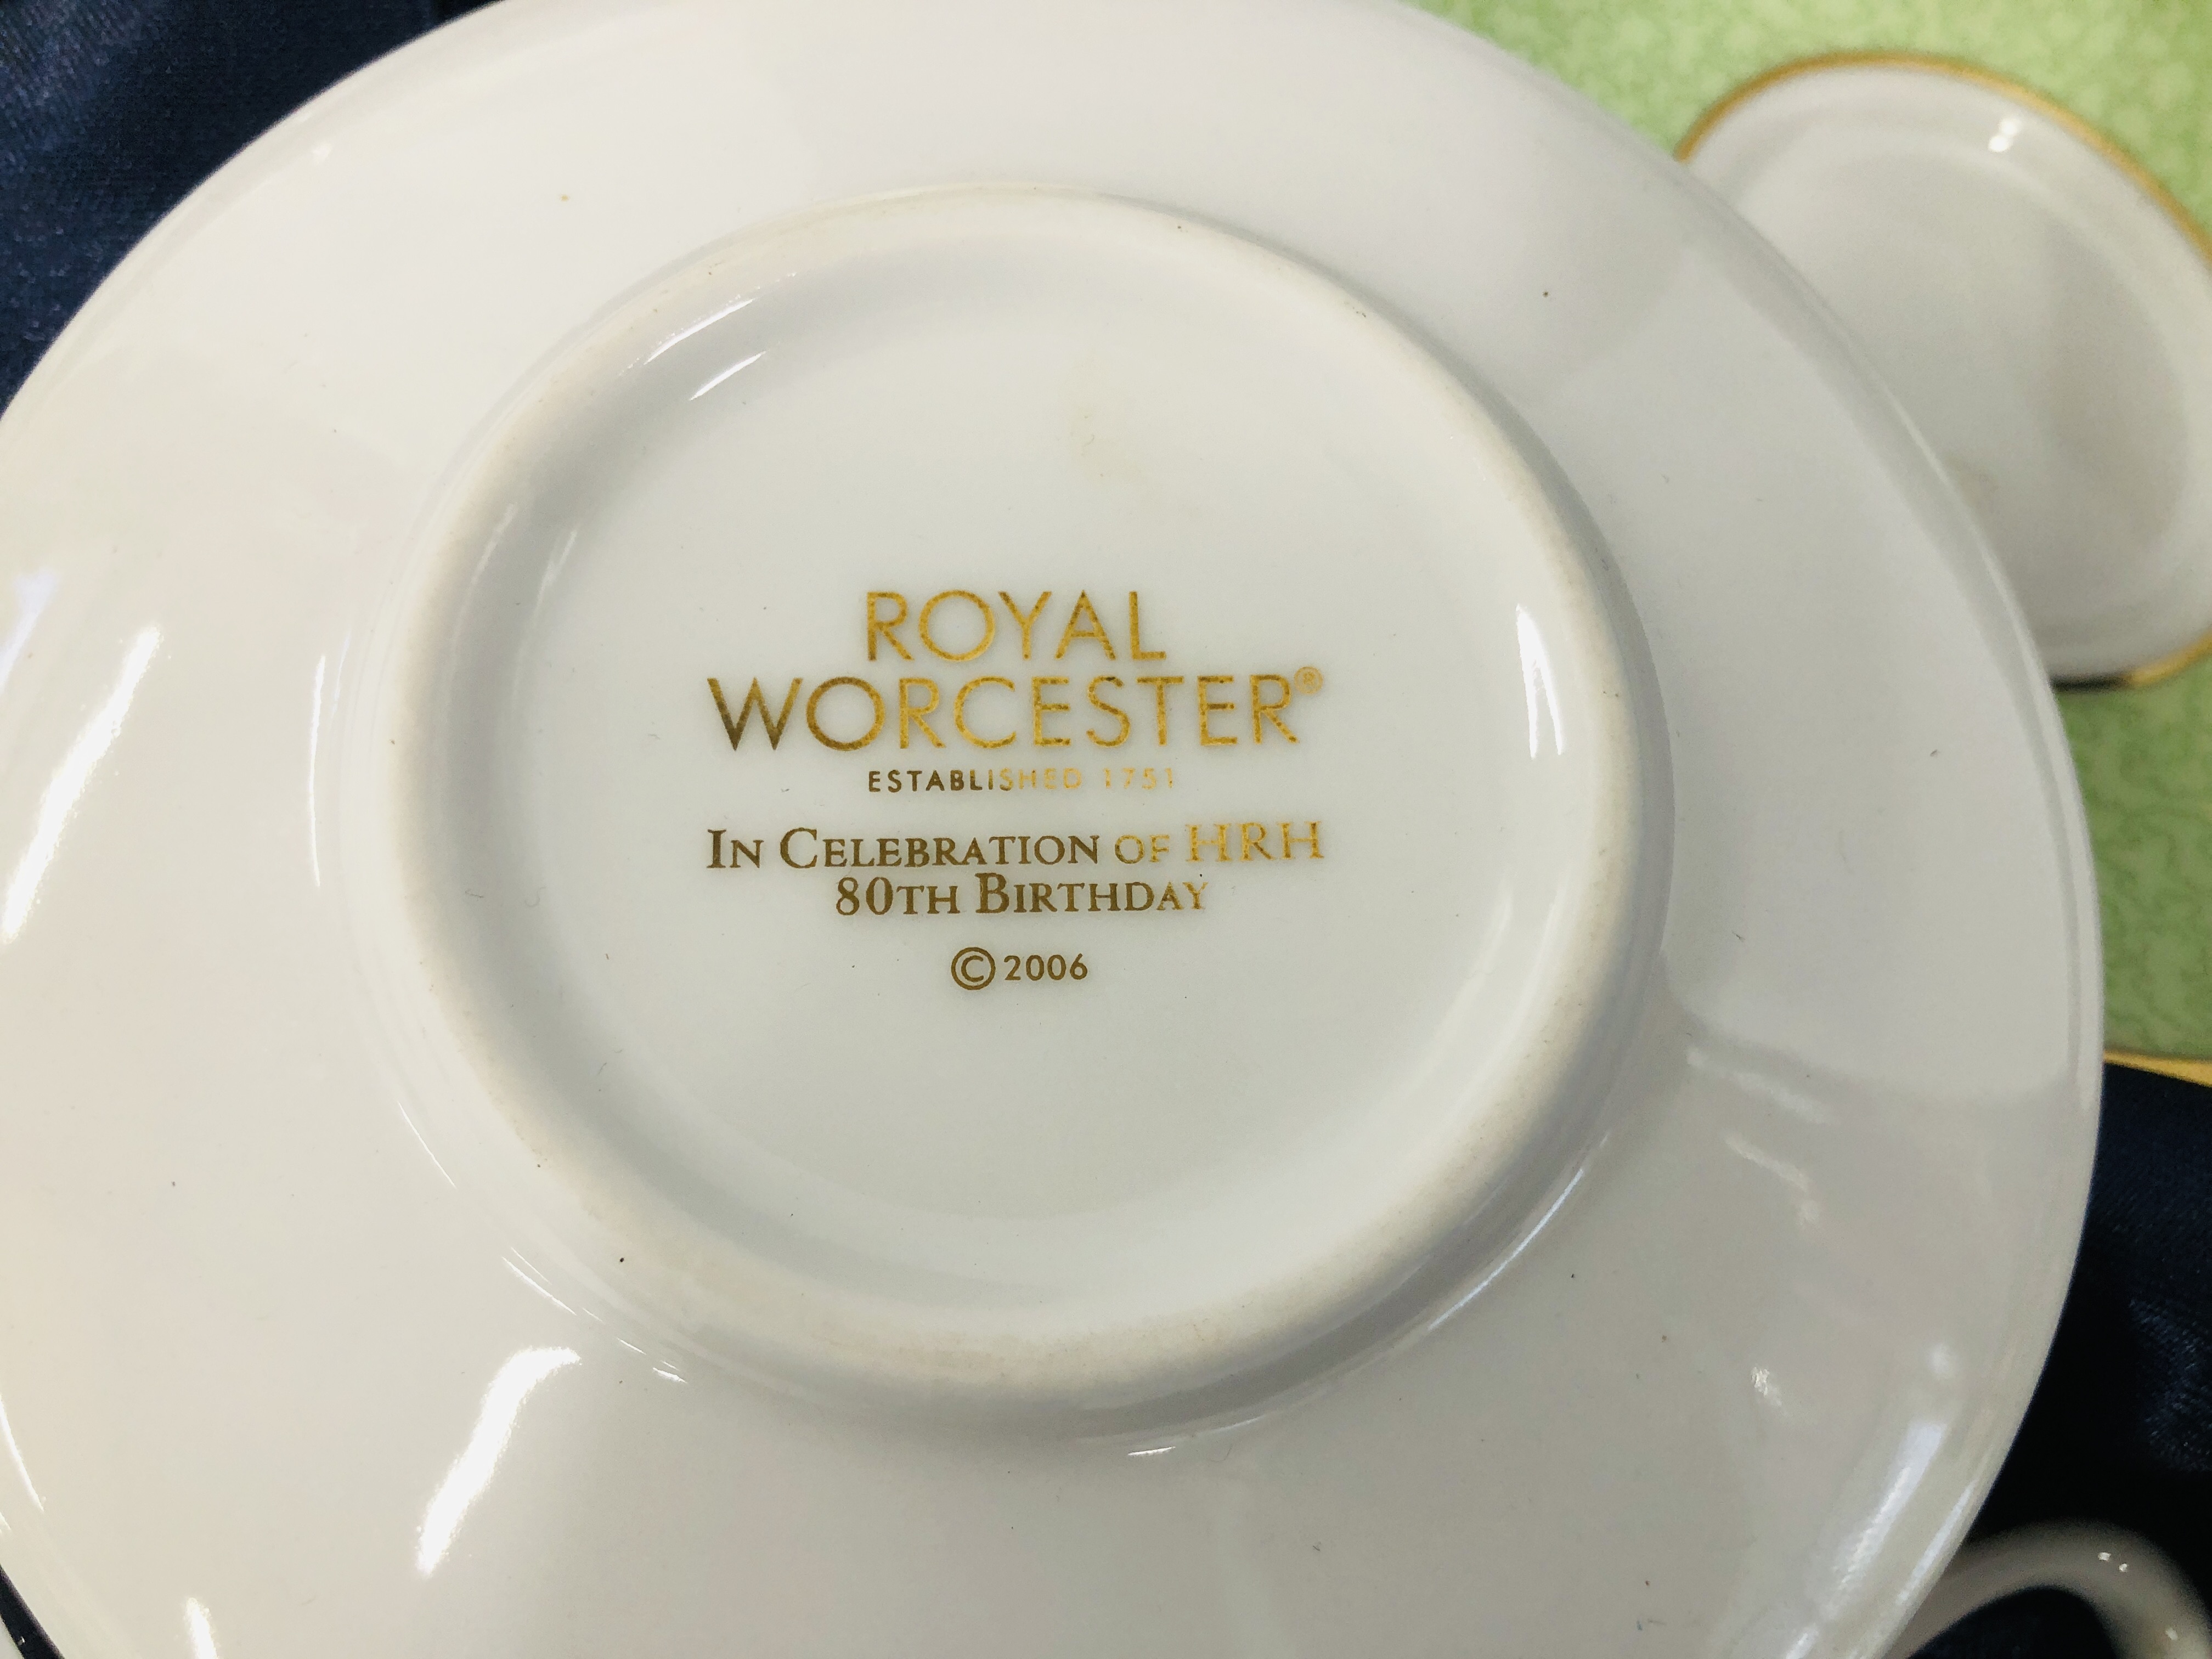 ROYAL WORCESTER EIGHT PIECE COFFEE SET "IN CELEBRATION OF HRH 80TH BIRTHDAY" IN ORIGINAL FITTED BOX - Image 3 of 6